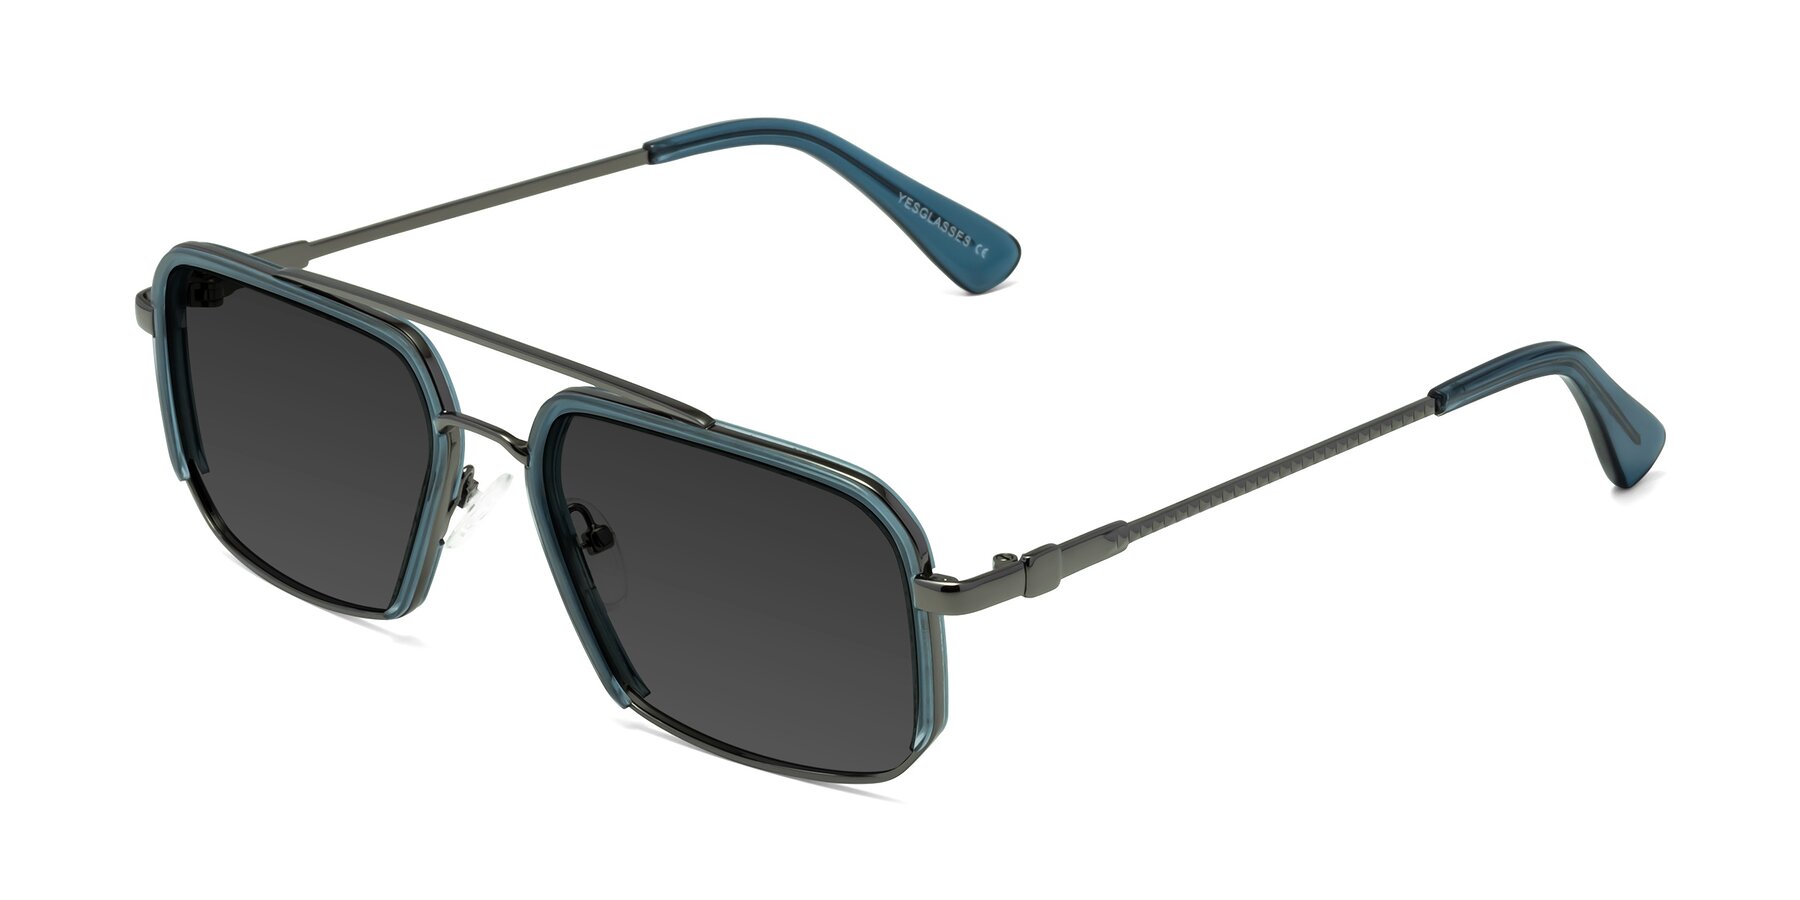 Angle of Dechter in Teal-Gunmetal with Gray Tinted Lenses